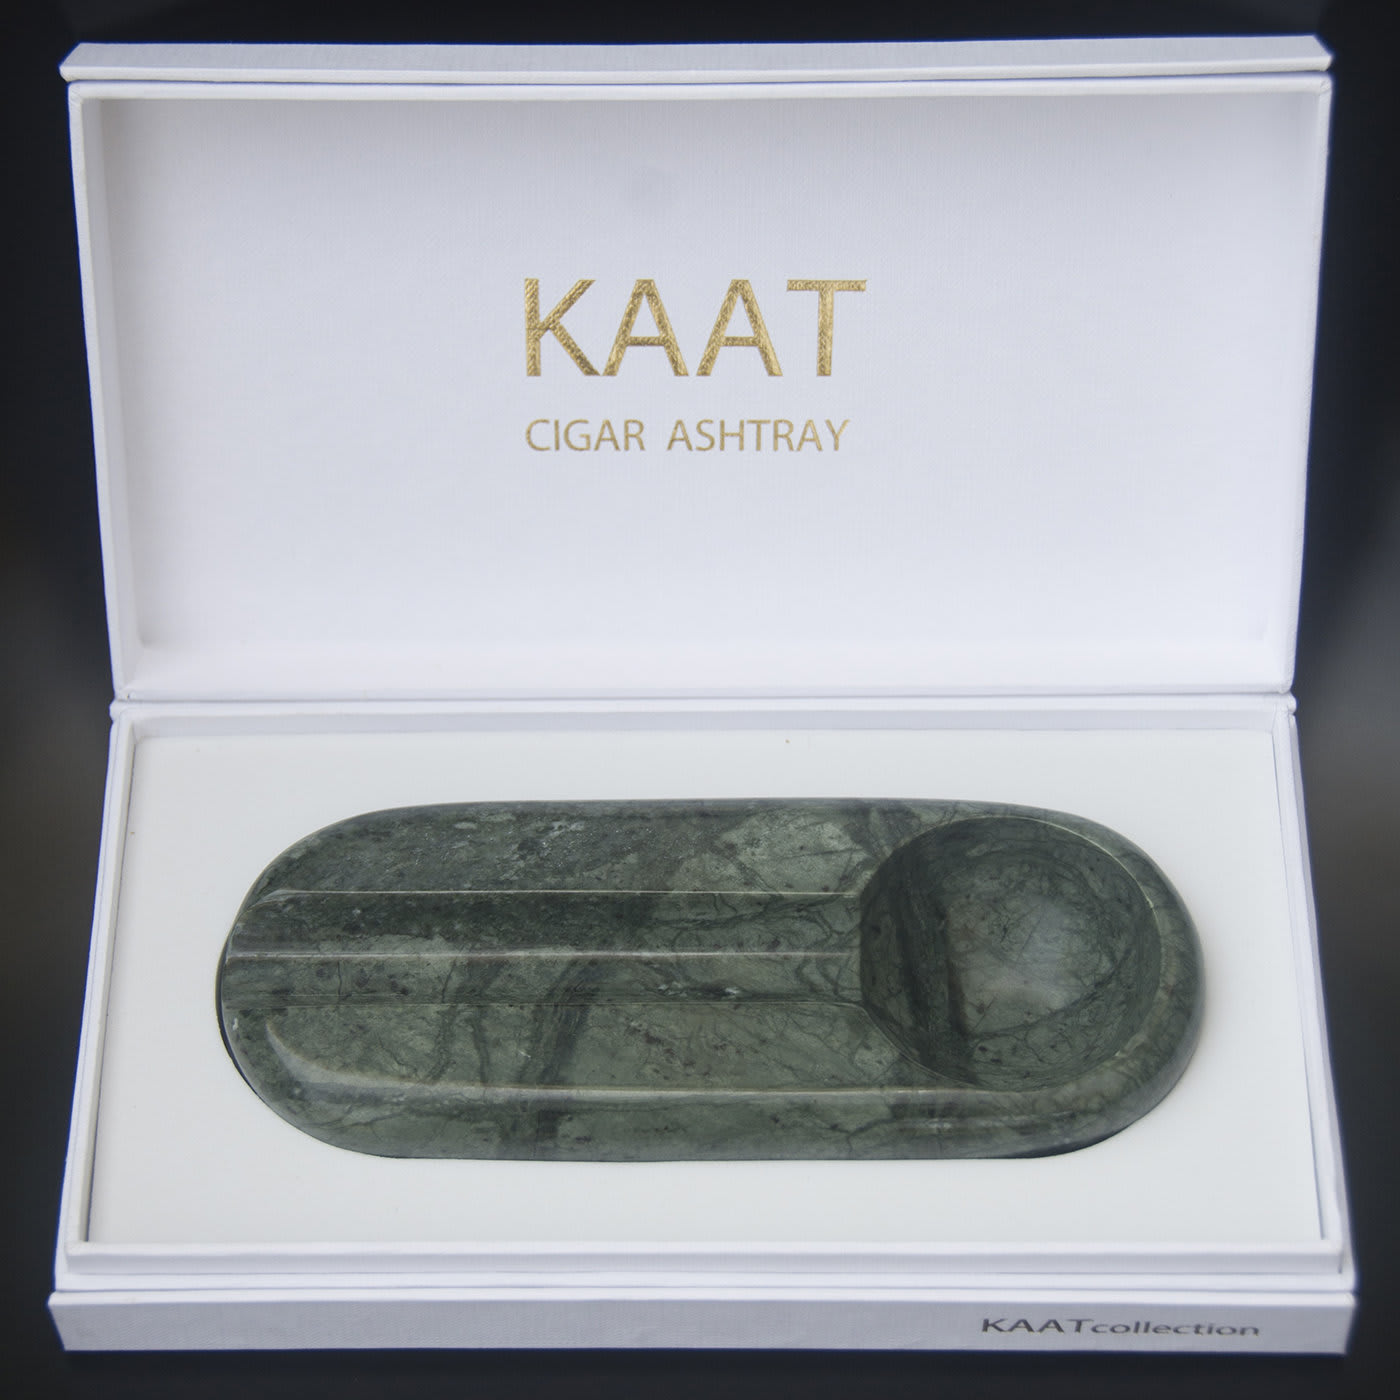 Verde Guatemala Cigar Ashtray with Box - Kaat by Michele Cucchiara and Philippos Zannettos